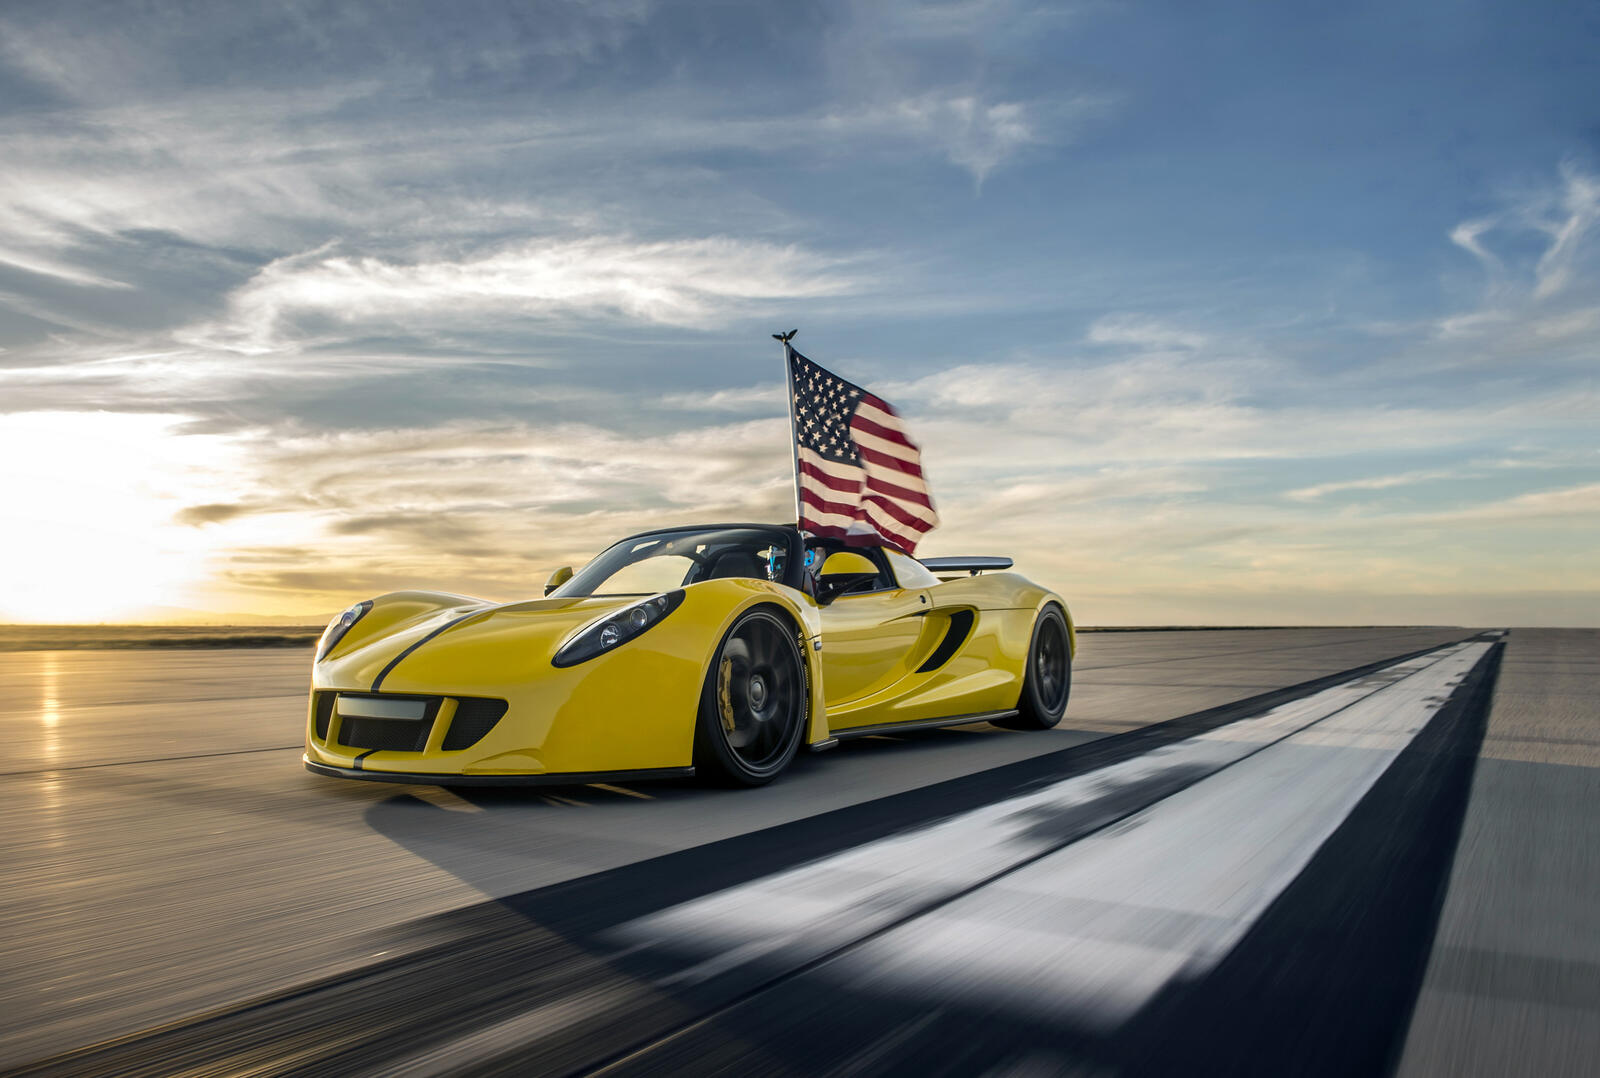 Free photo A yellow Hennessey Venom GT drives down the runway with an American flag flying in the wind